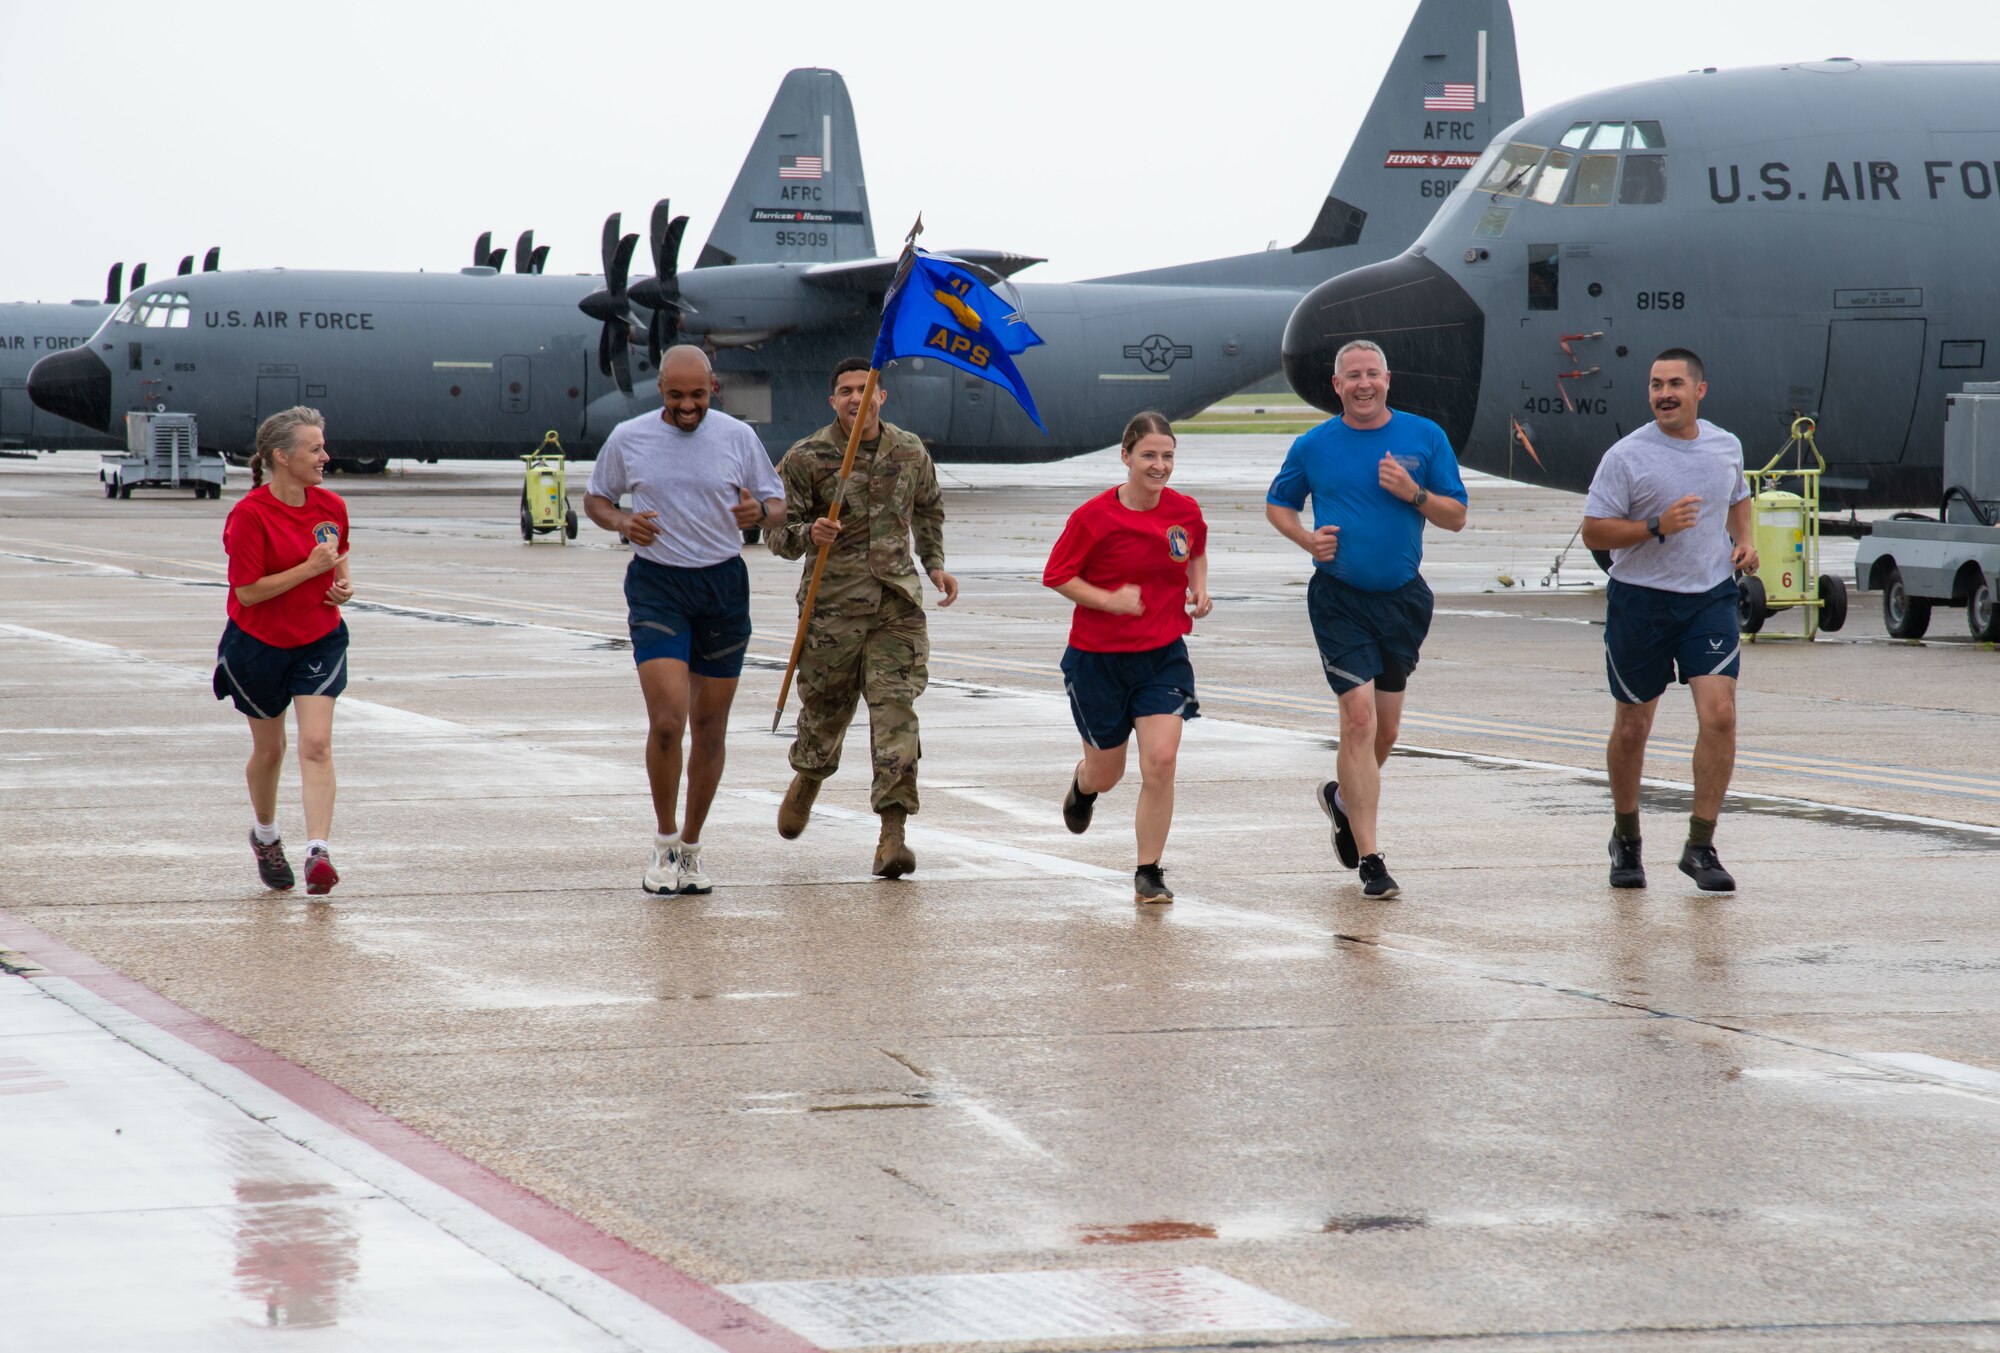 Members of the 41st Aerial Port Squadron at Keesler Air Force Base, Miss., participate in the “Port Dawg Memorial Run” on the Keesler flight line June 5, 2021. The event serves as a way for members to pay tribute to lives lost in the career-field across the entire Air Force. (U.S. Air Force photo by Staff Sgt. Kristen Pittman)